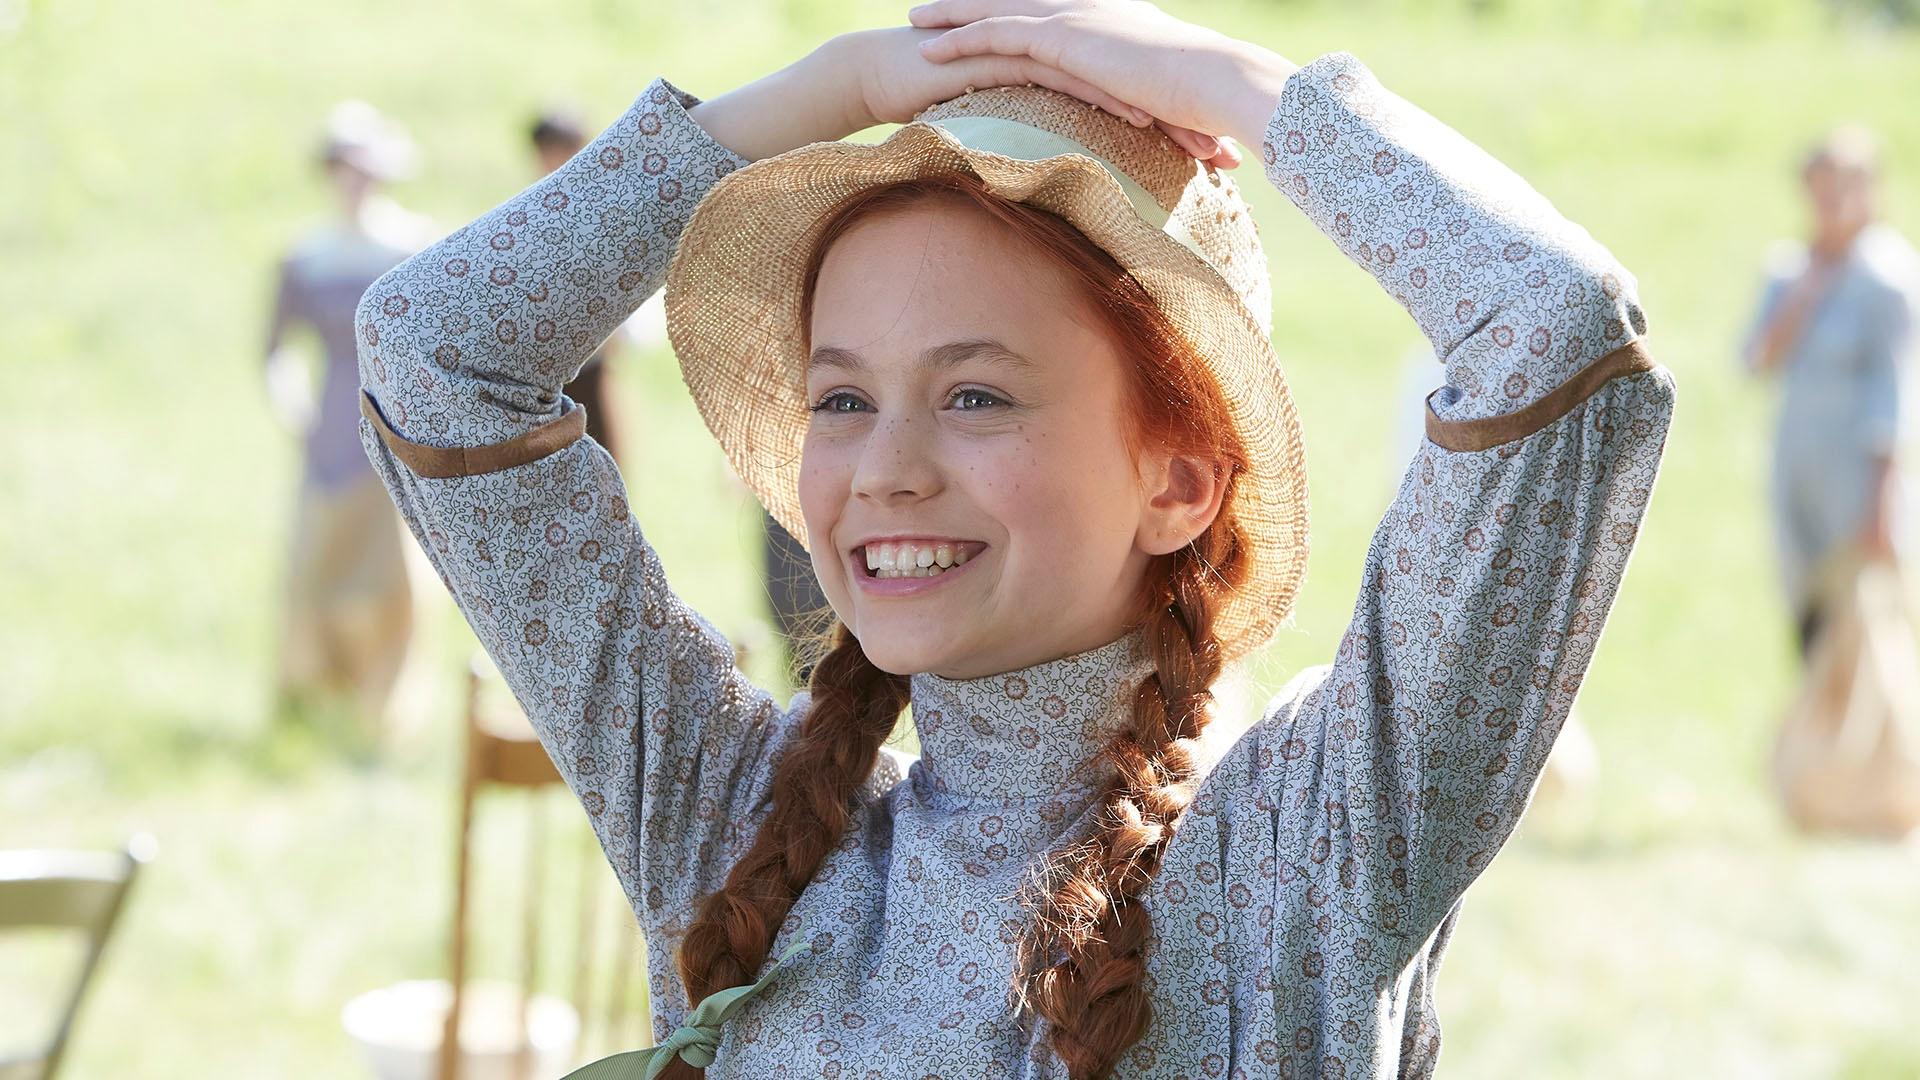 anne of green gables 1987 download